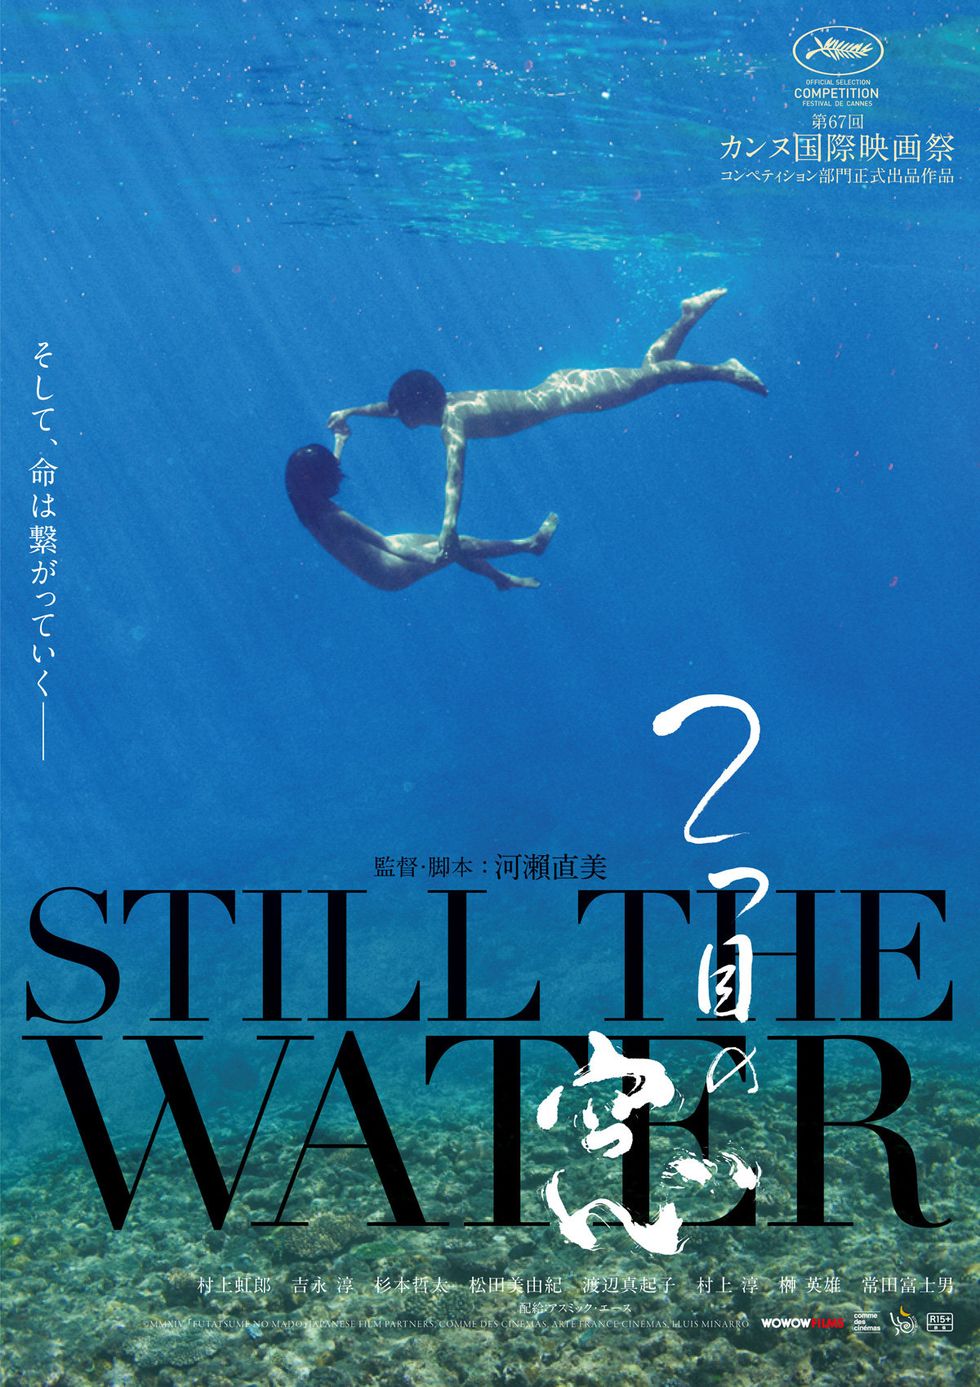 Water, Font, Poster, Recreation, Swimming, Book cover, Album cover, Ocean, Leisure, Diving, 